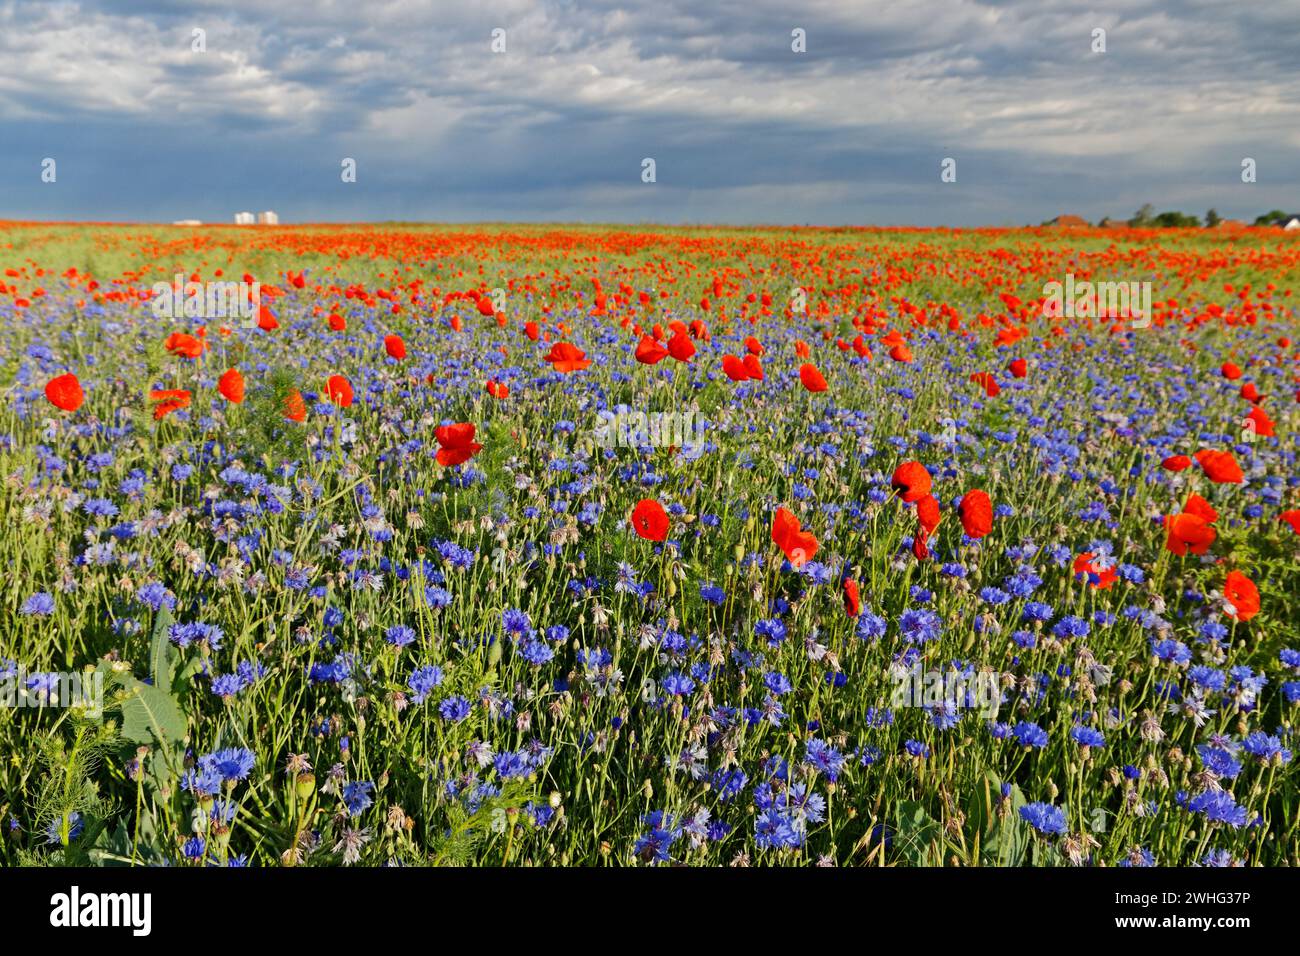 Colorful field in summer with red poppy flowers and blue cornflowers Stock Photo